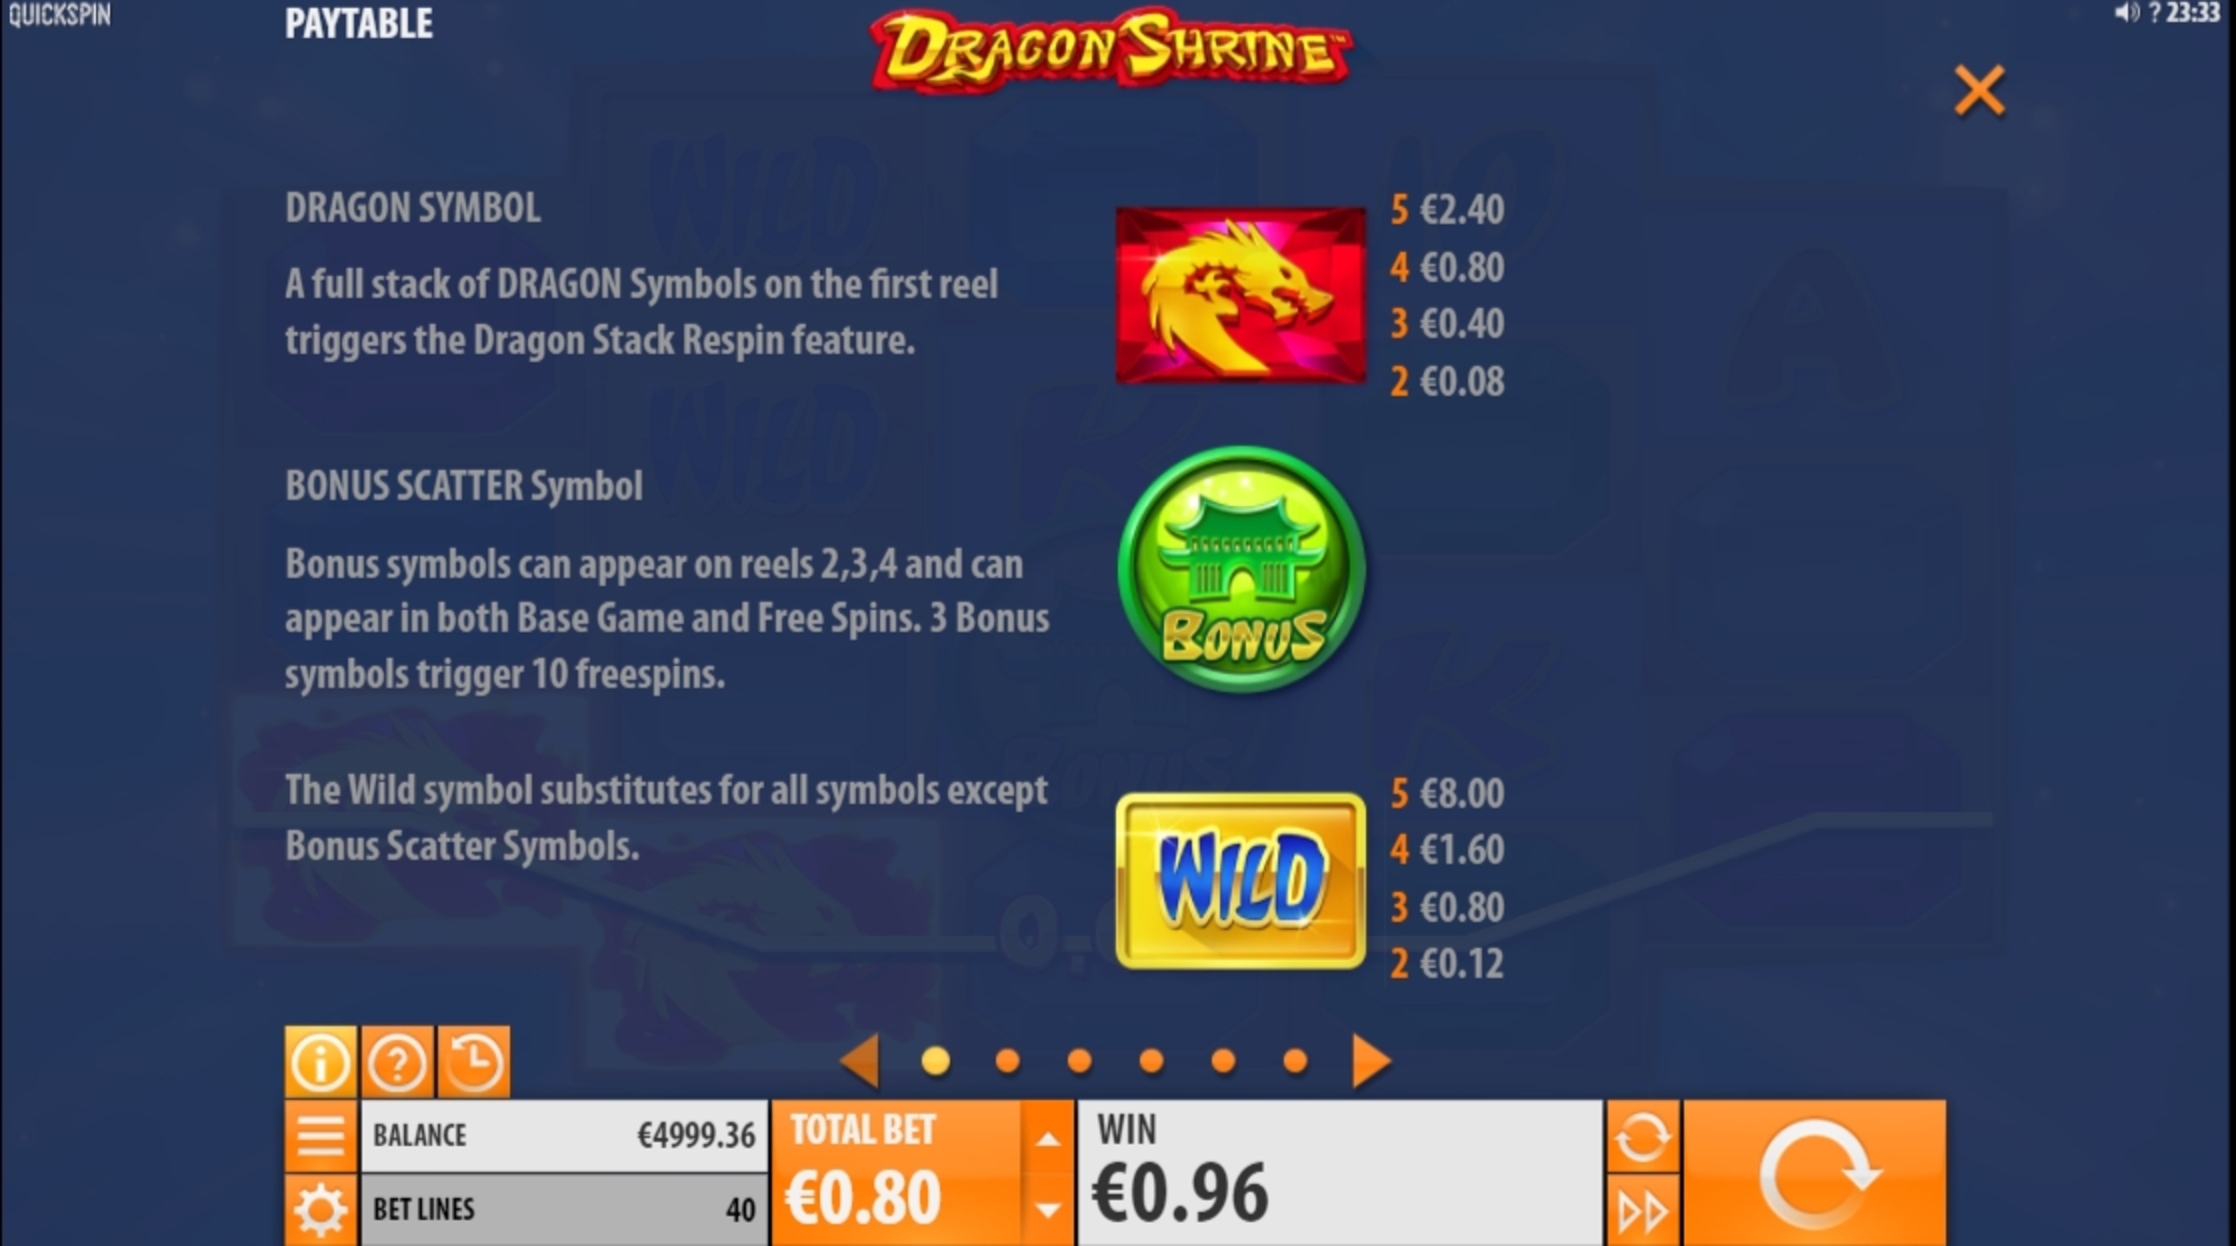 Info of Dragon Shrine Slot Game by Quickspin